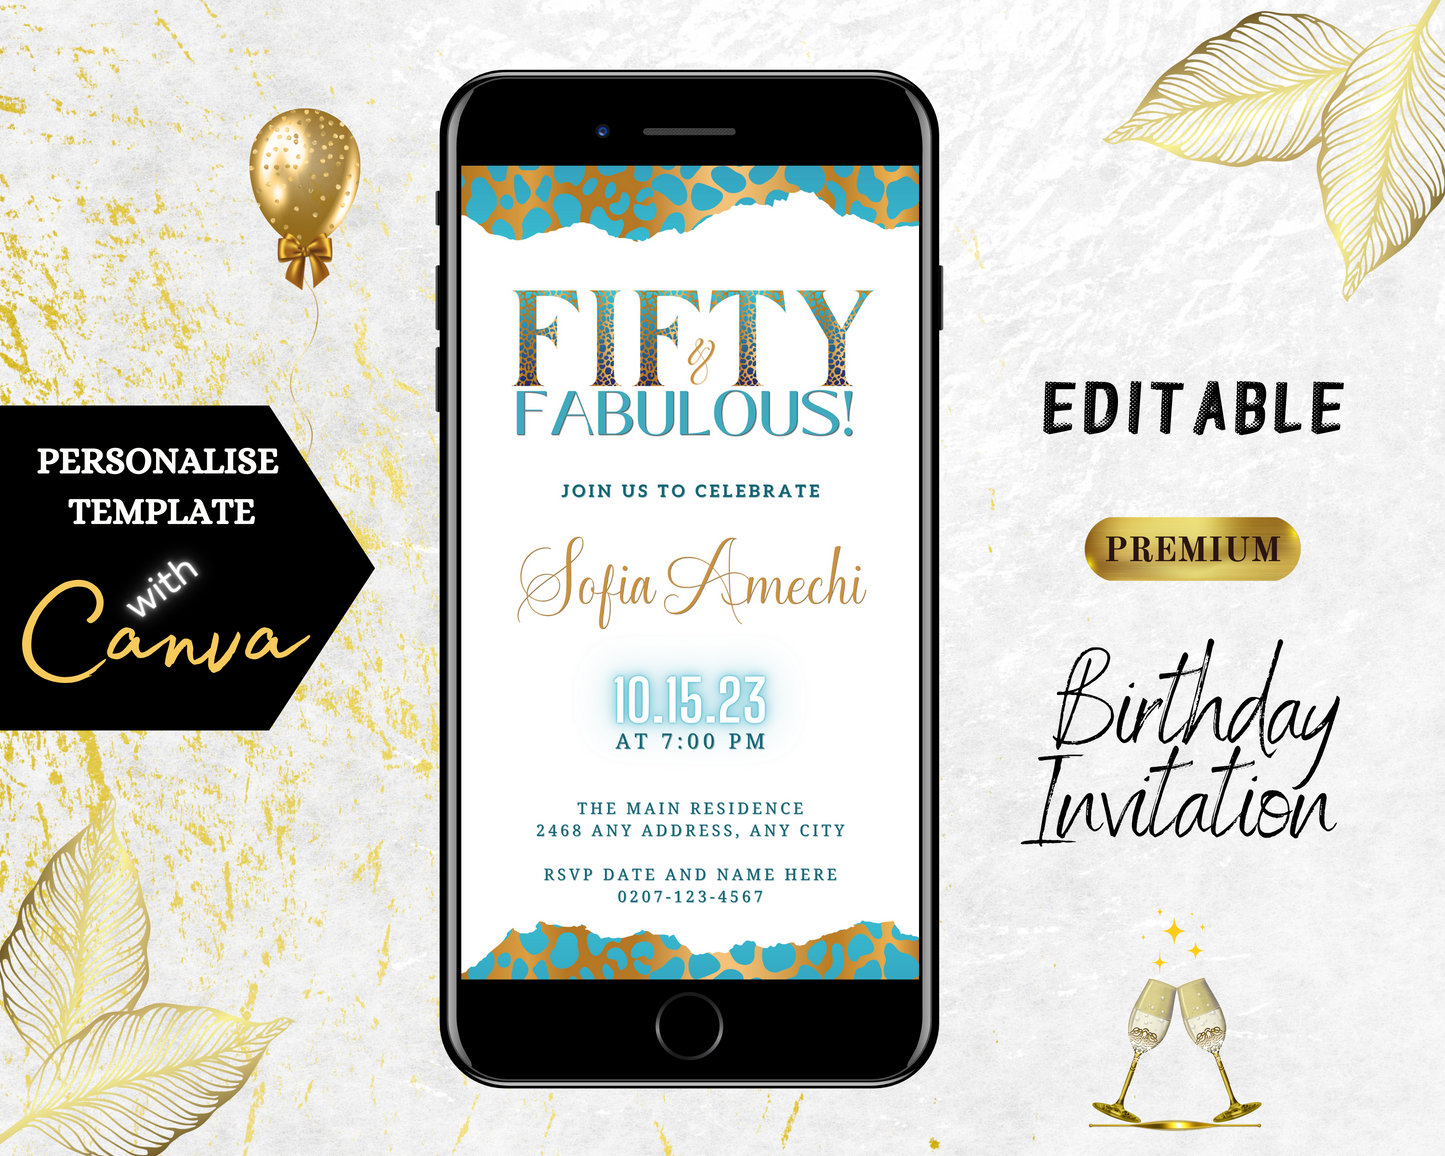 Customisable Teal White Gold Cheetah 50 & Fabulous Party Evite displayed on a smartphone screen with editable text and design elements.